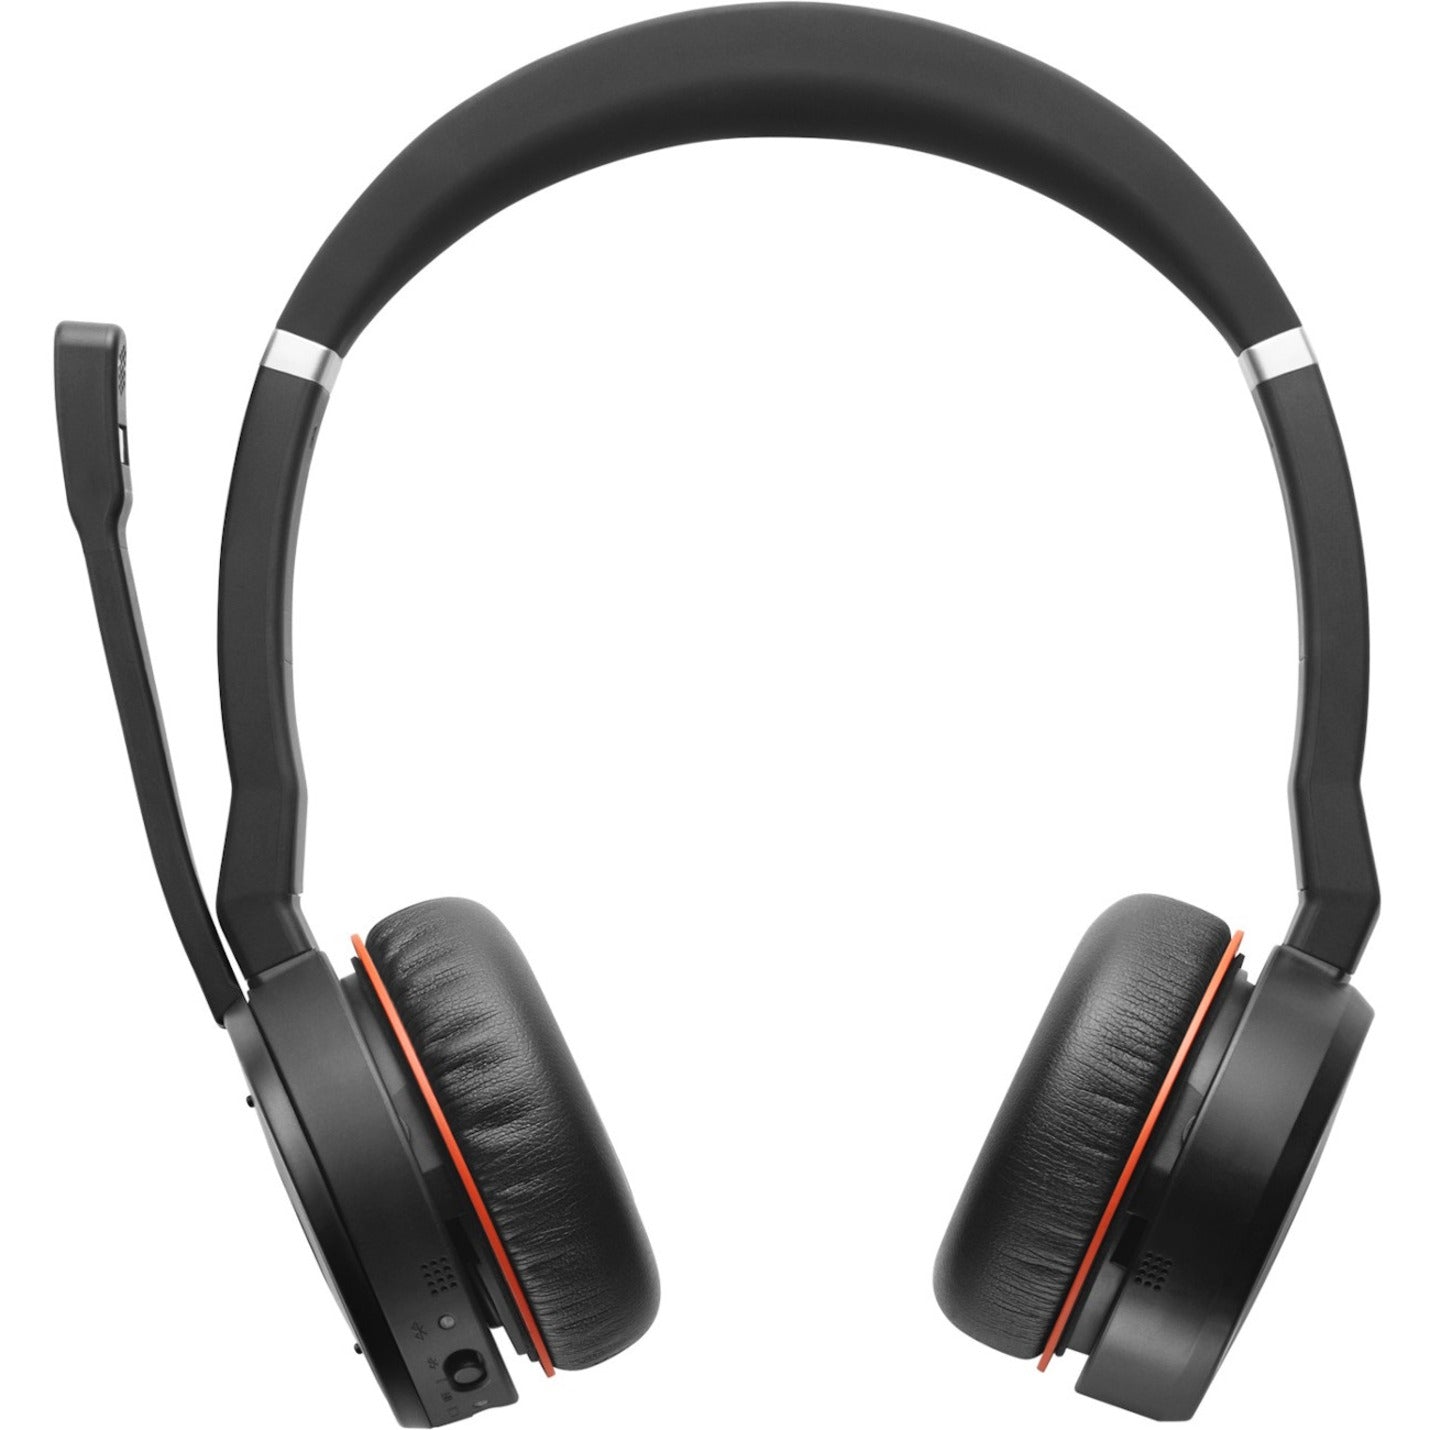 For those experiencing microphone issues with the Jabra Evolve2 75 : r/Jabra